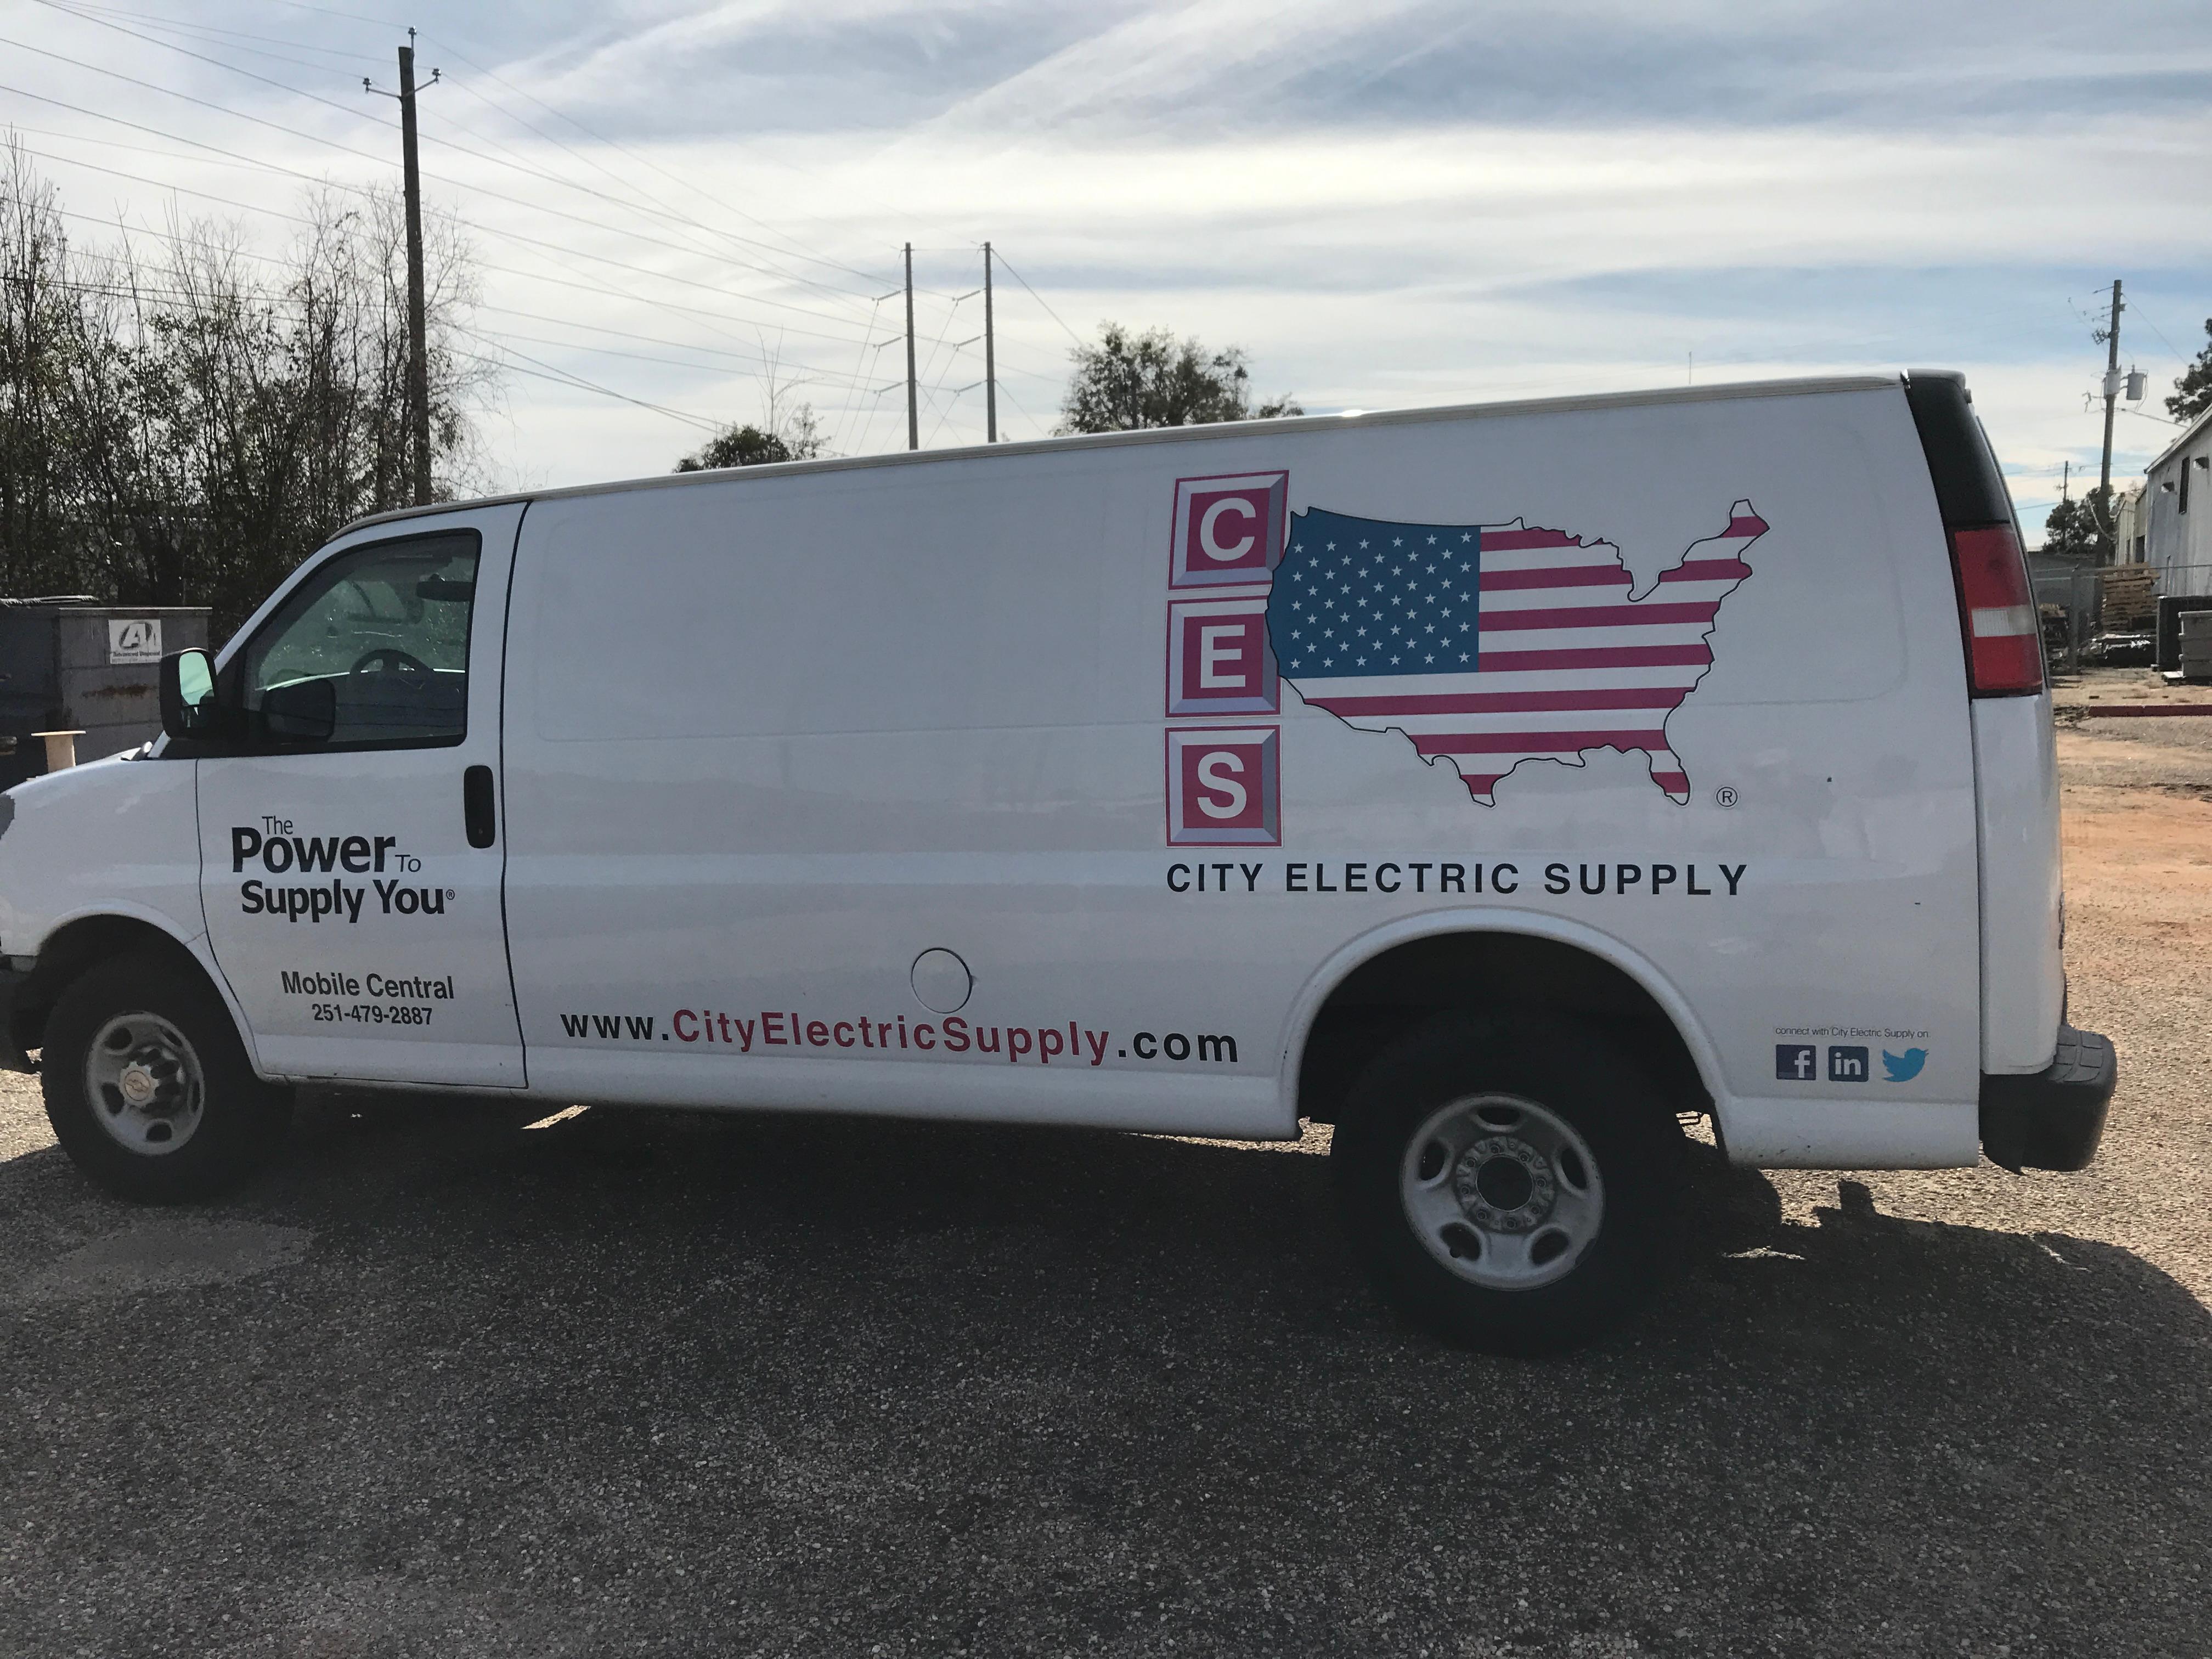 City Electric Supply Mobile Central Photo